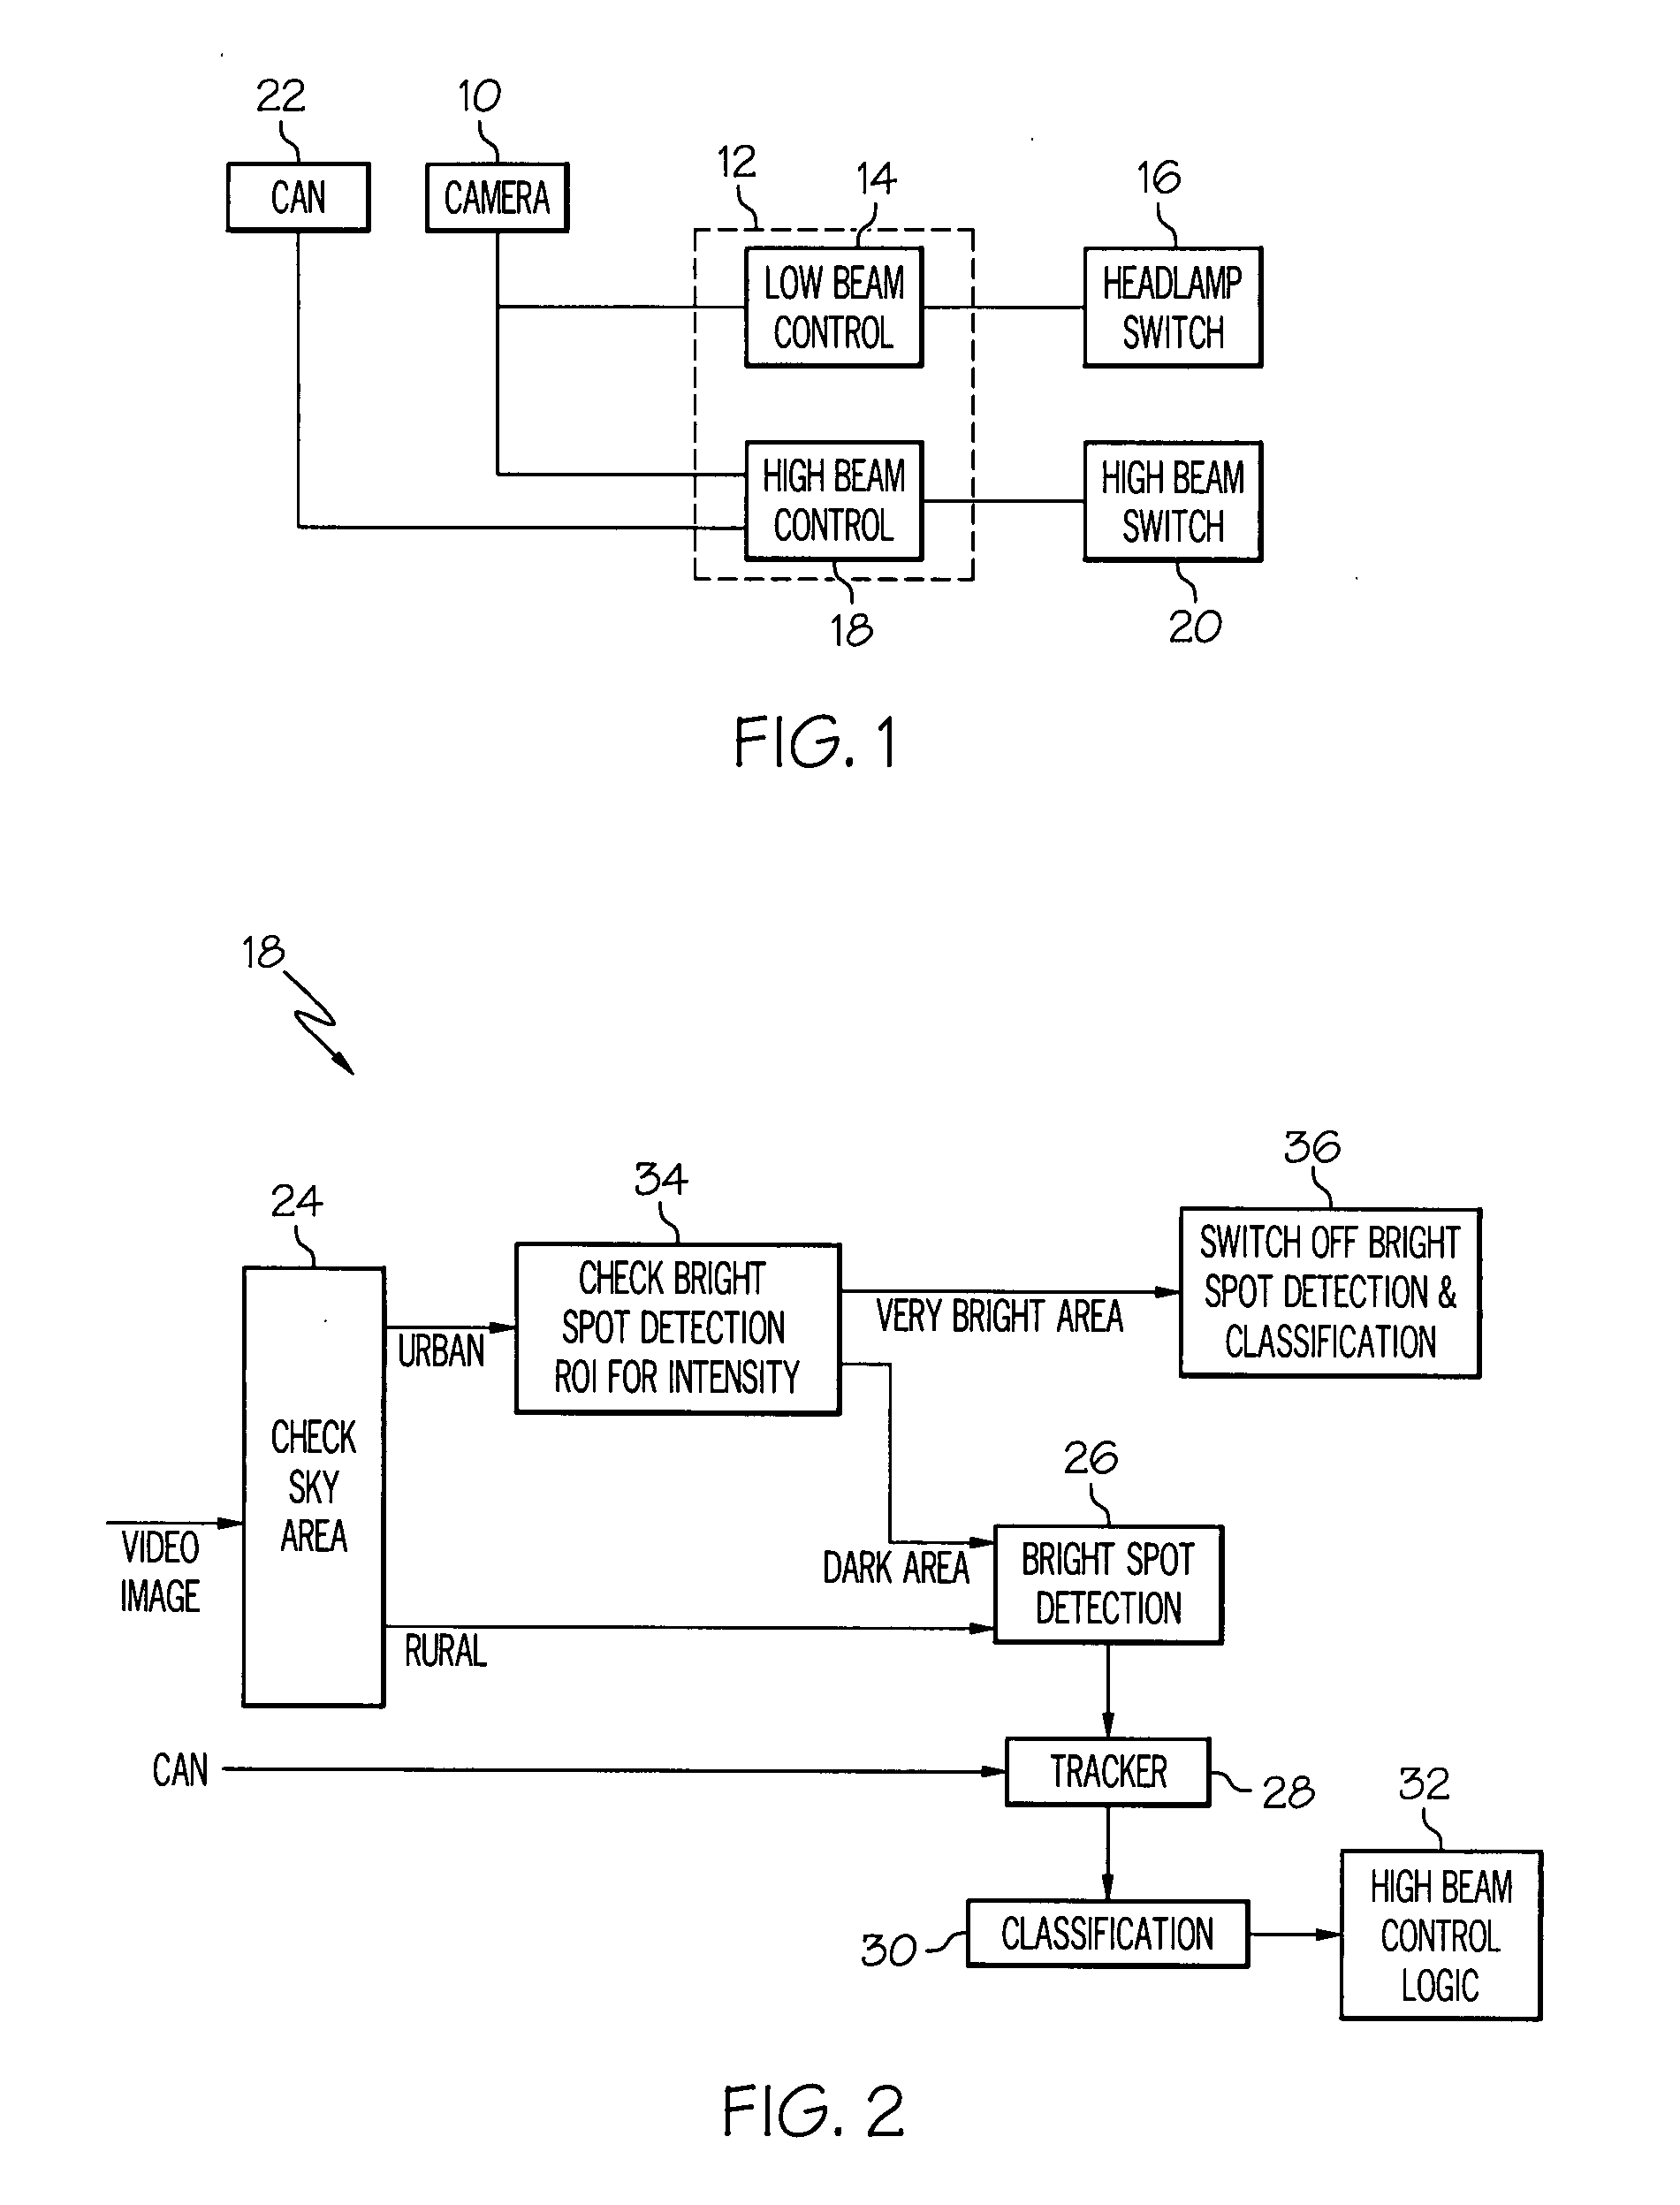 Bright spot detection and classification method for a vehicular night-time video imaging system